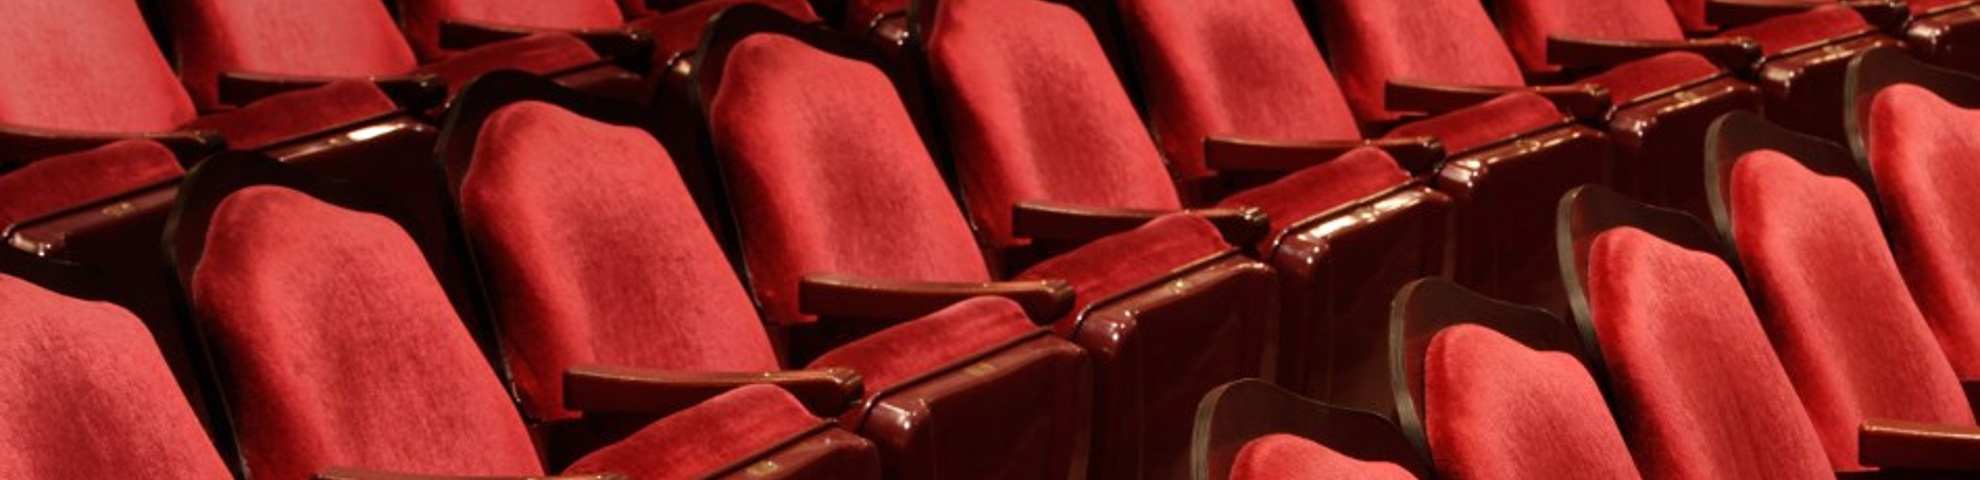 Several red theatre seats.